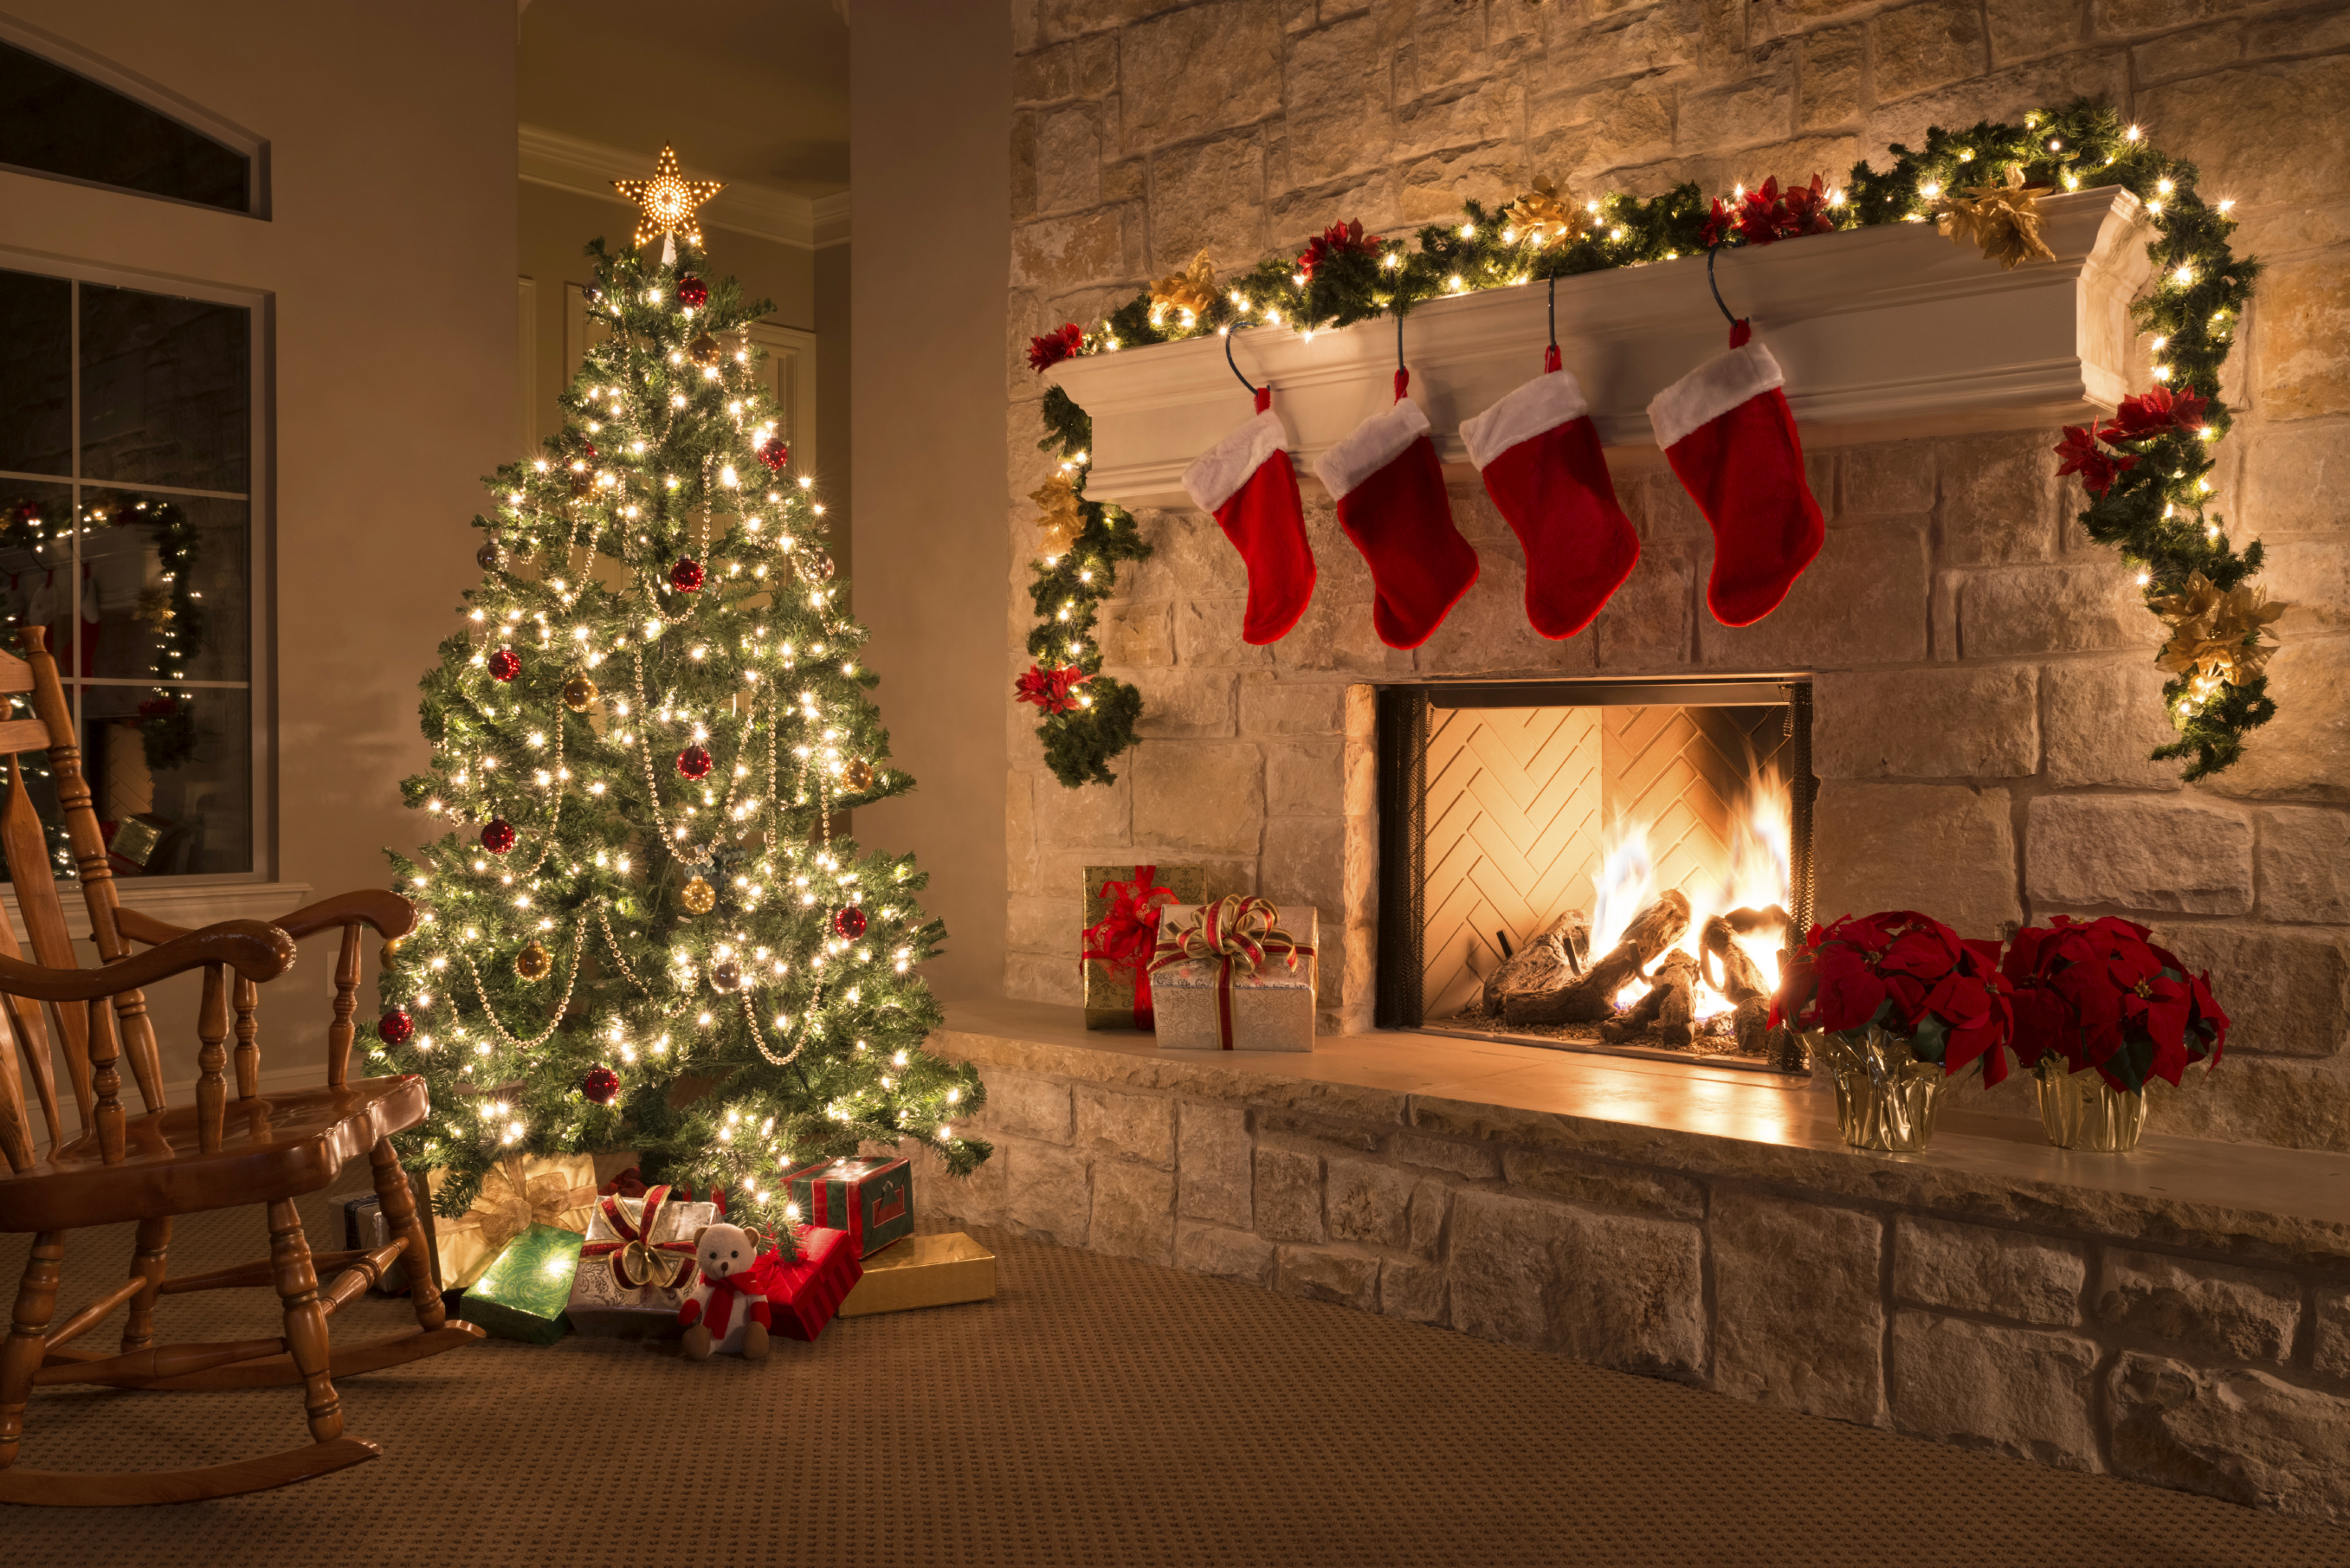 room with christmas tree decorations and stockings